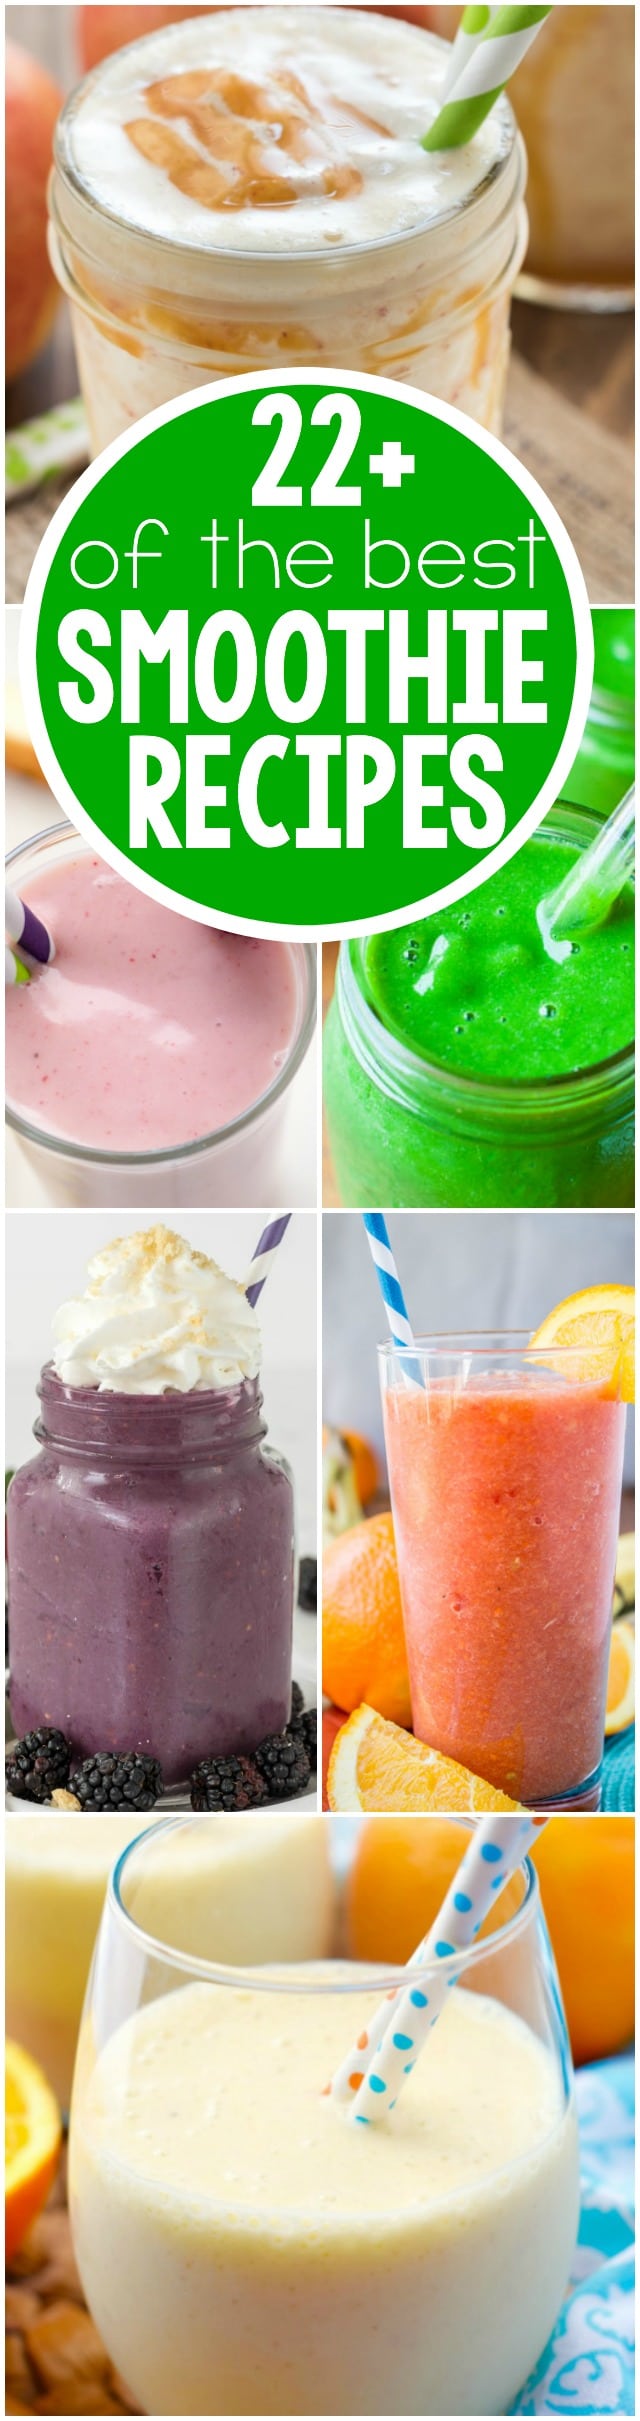 22 of the BEST Smoothie Recipes to help you with your healthier eating goal this year!